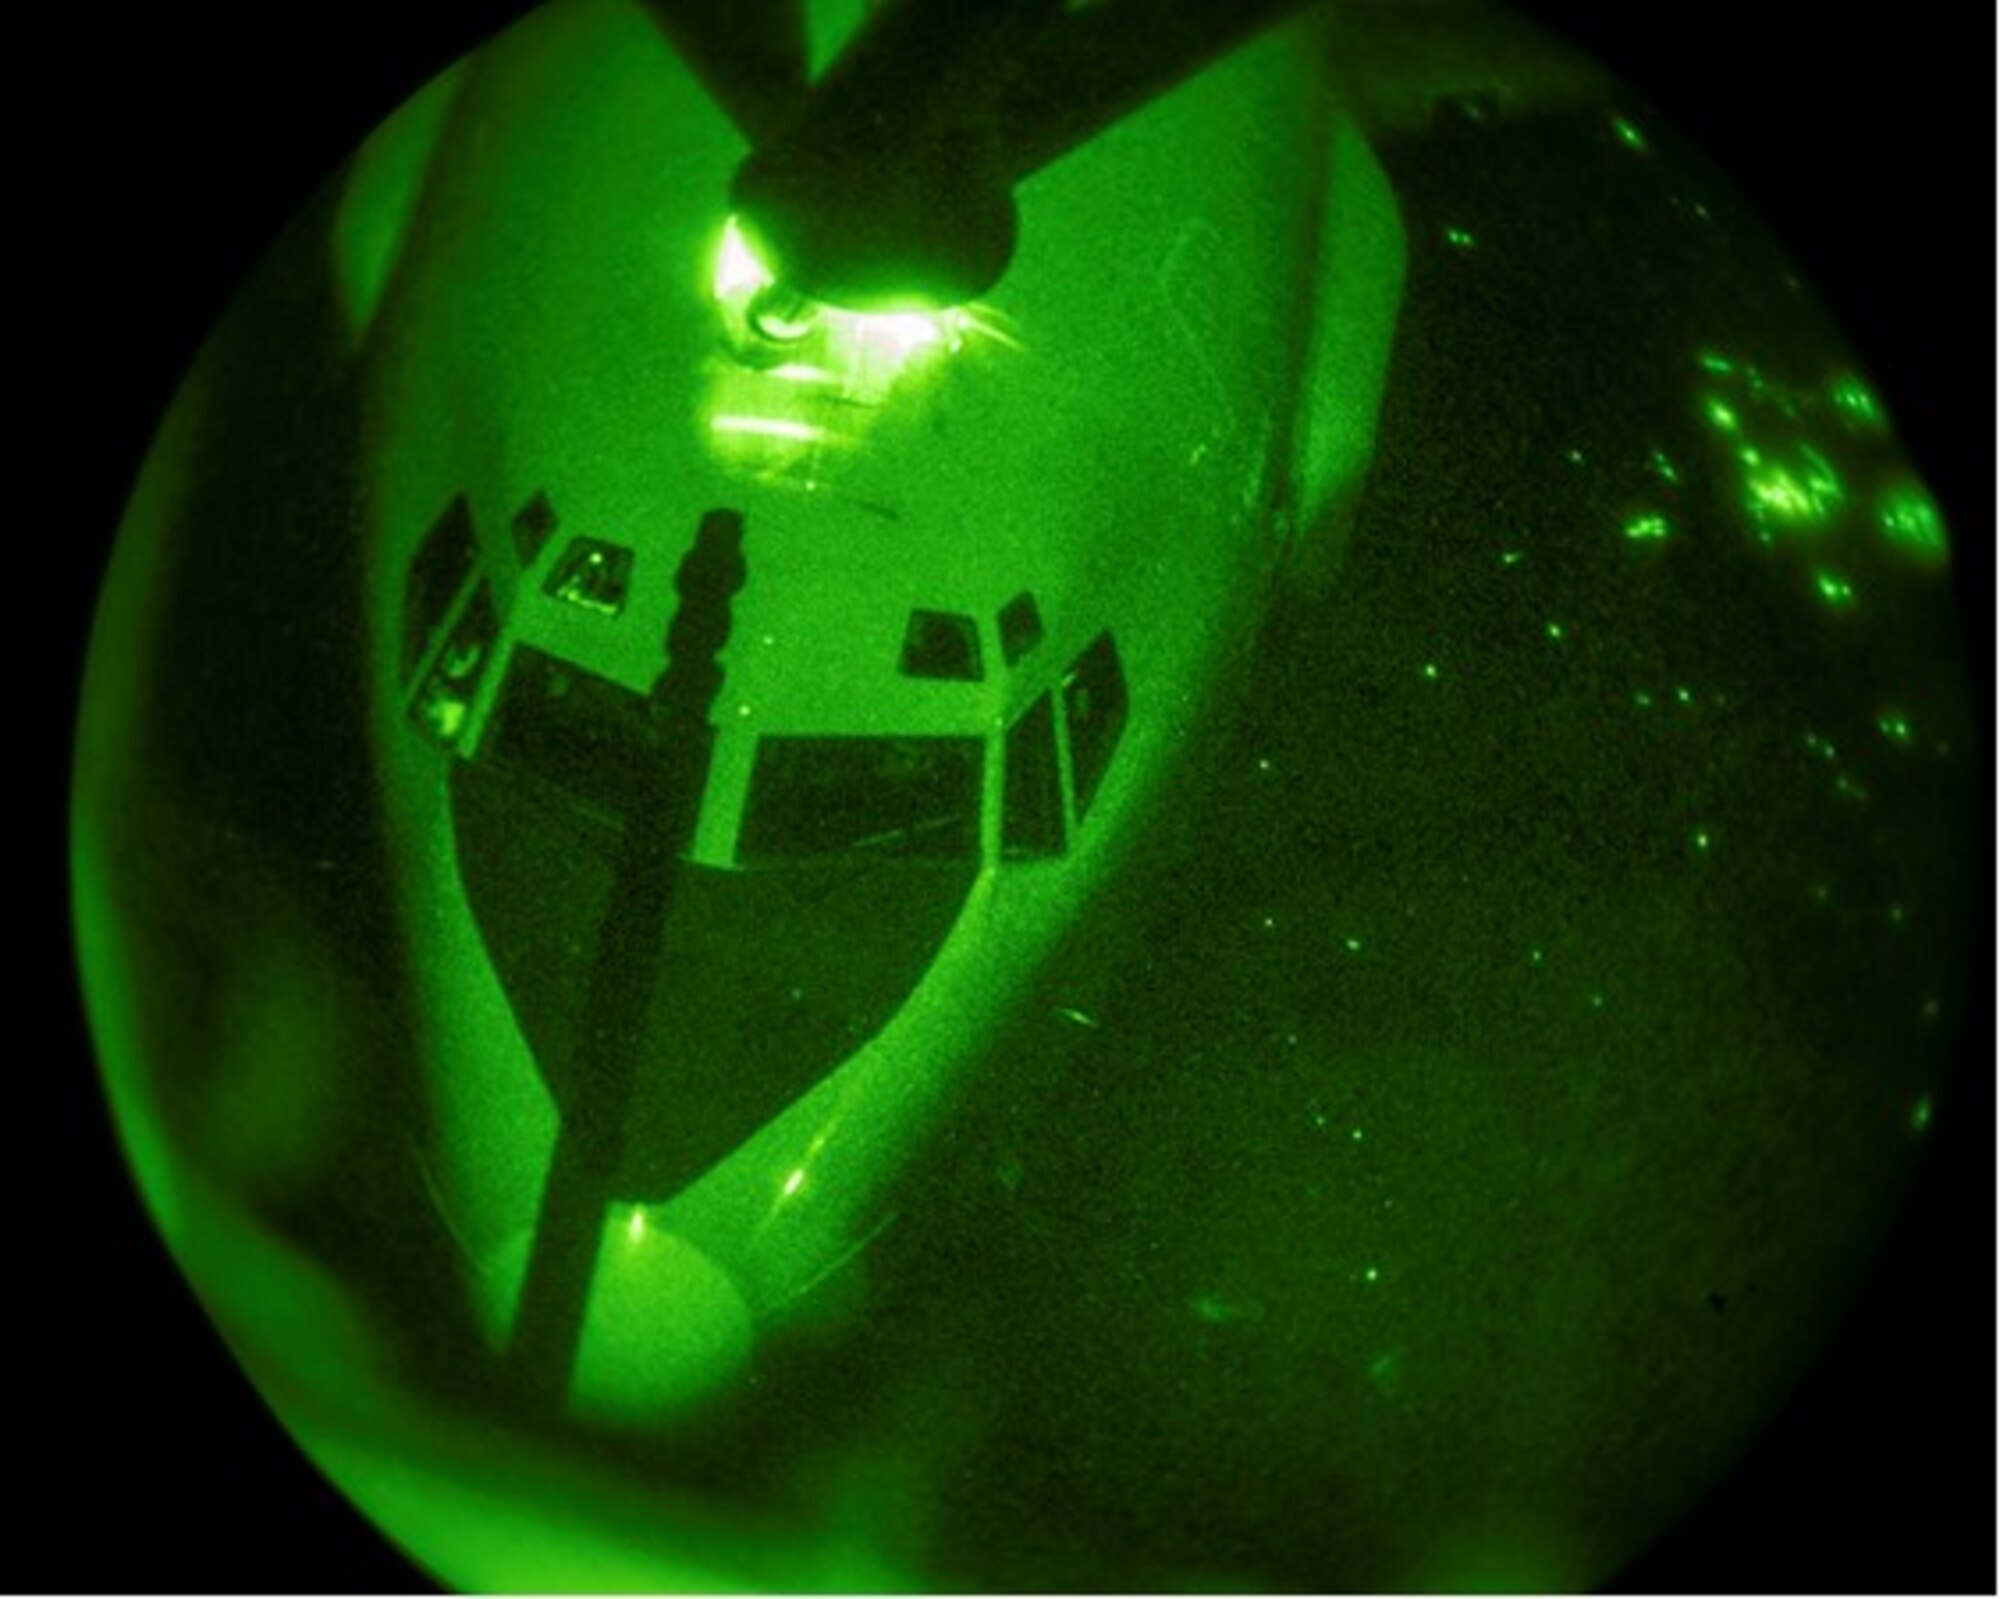 A KC-135 Stratotanker from Fairchild Air Force Base refuels a Boeing E-3 Sentry during a 72-hour endurance mission, Oct. 4, 2022. Crews from Fairchild provided air refueling support during the 72-hour endurance mission, allowing the E-3 crews to maintain mission readiness. (U.S. Air Force Photo by 2nd Lt. Ariana E. Wilkinson)